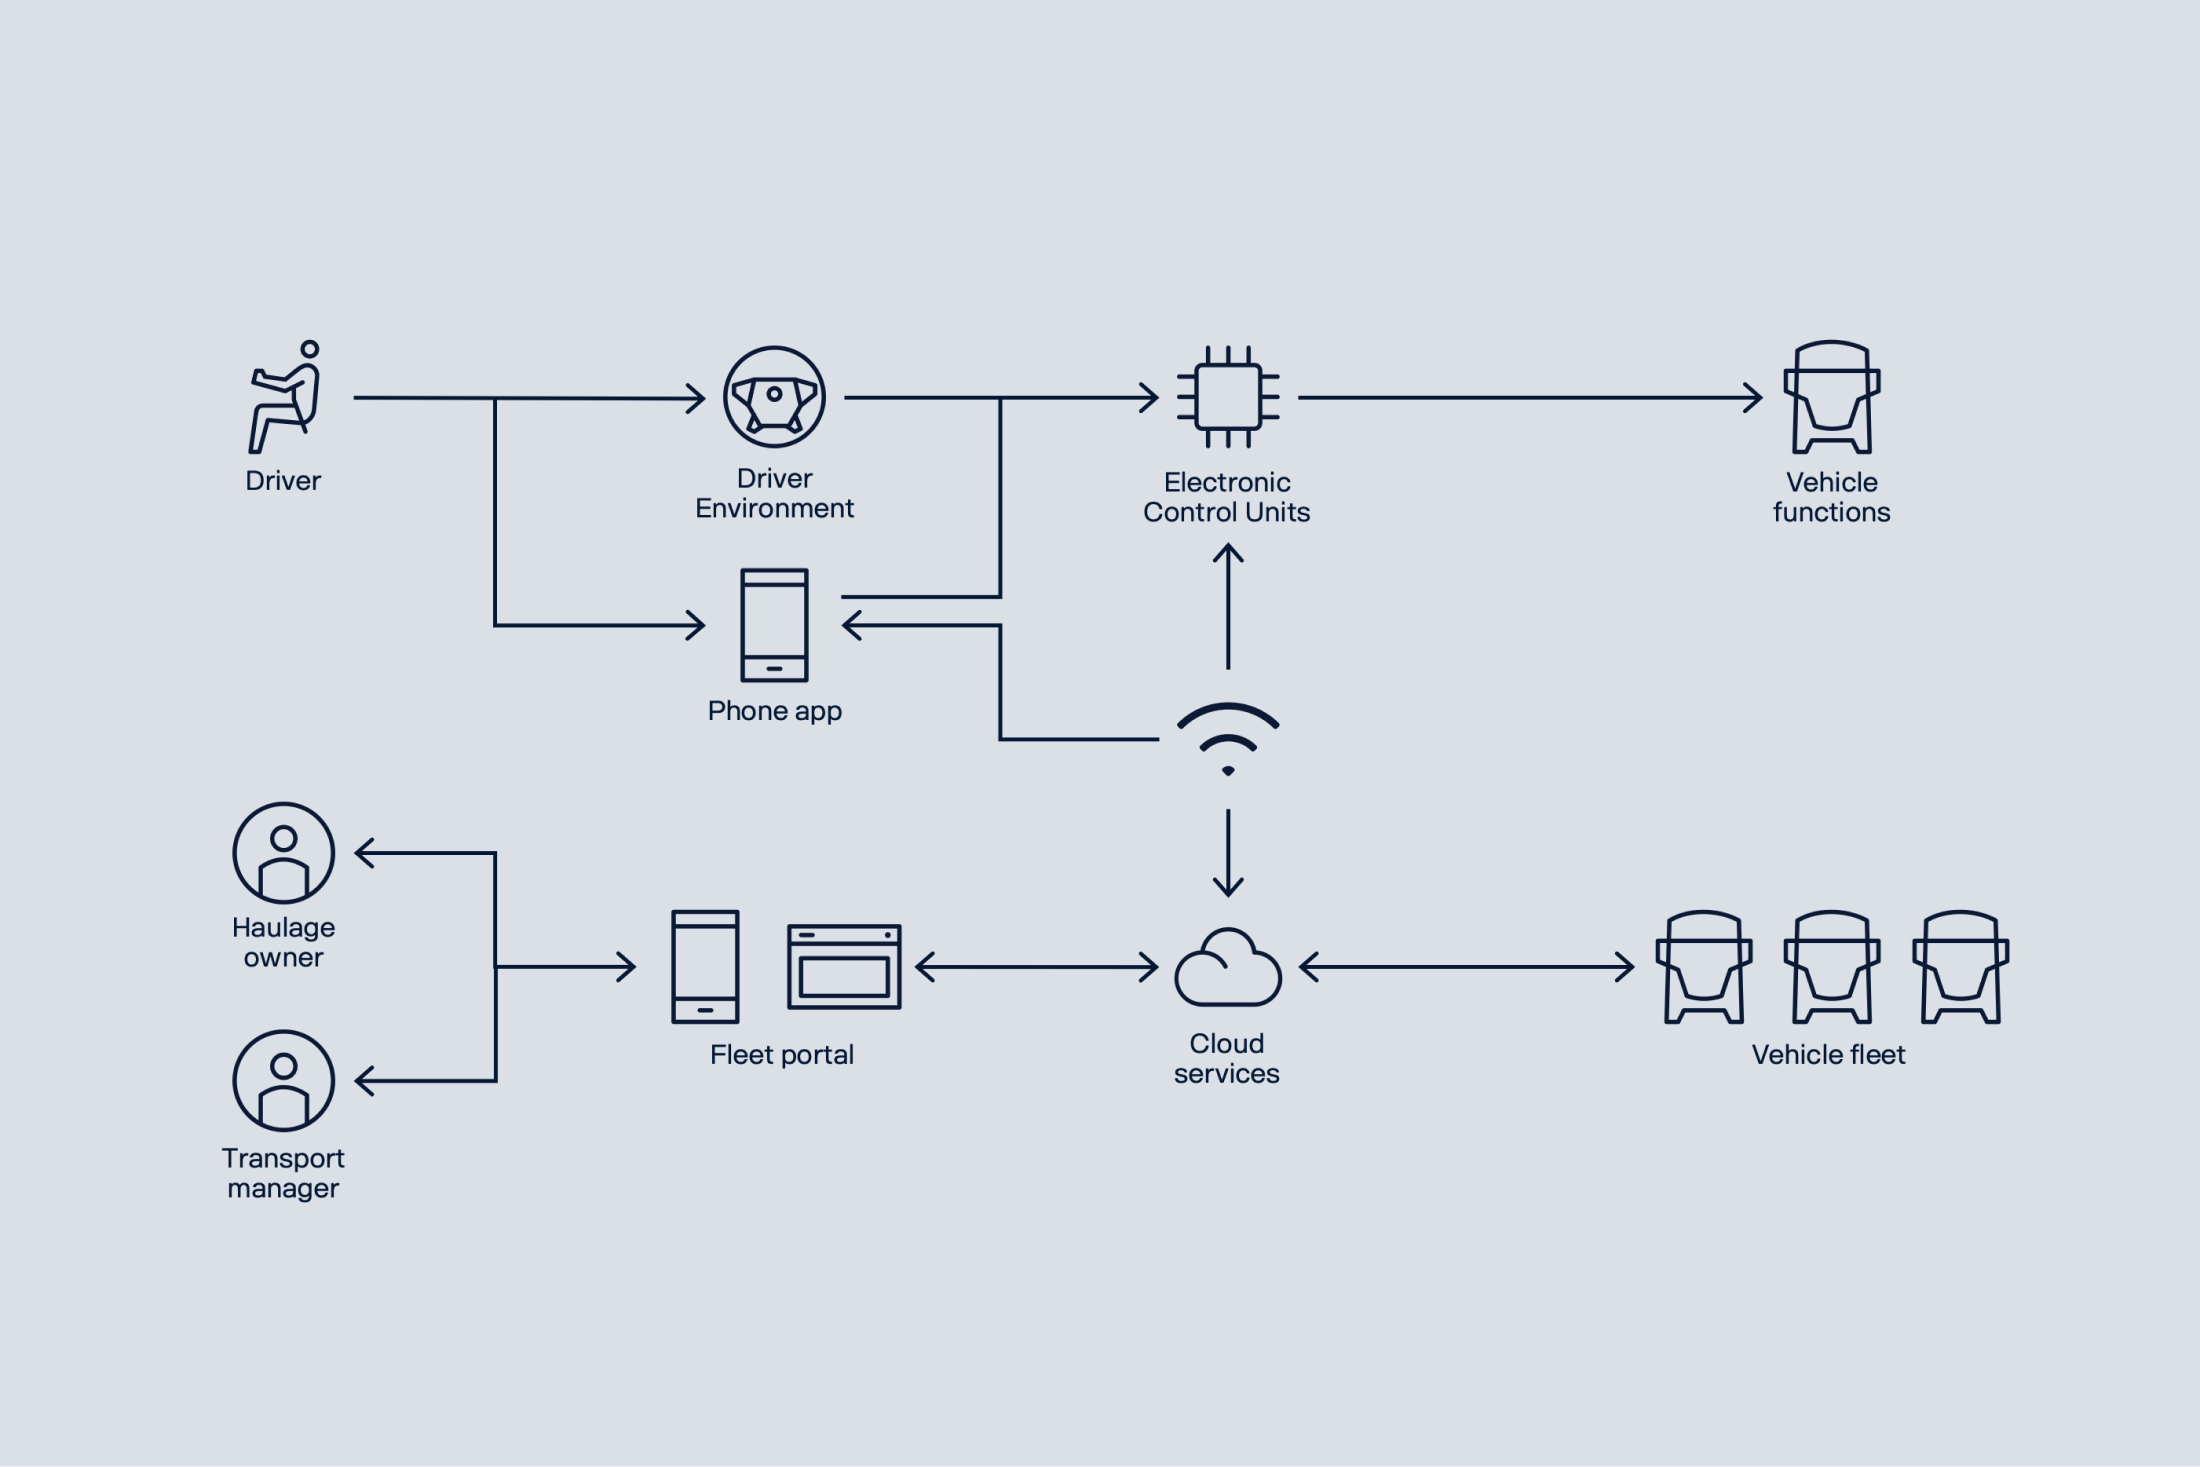 Diagram of the Scania product ecosystem